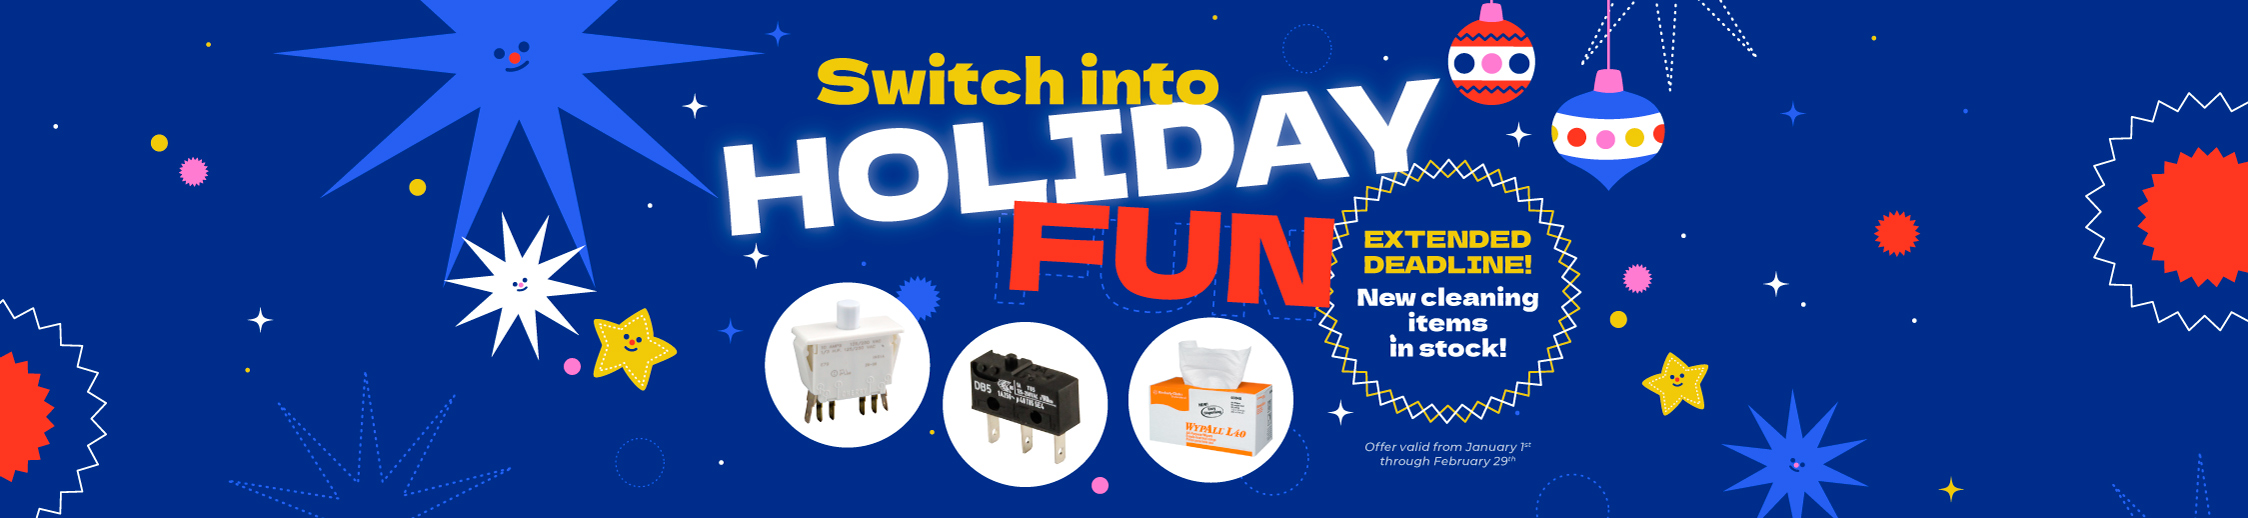 Switch into Holiday Fun